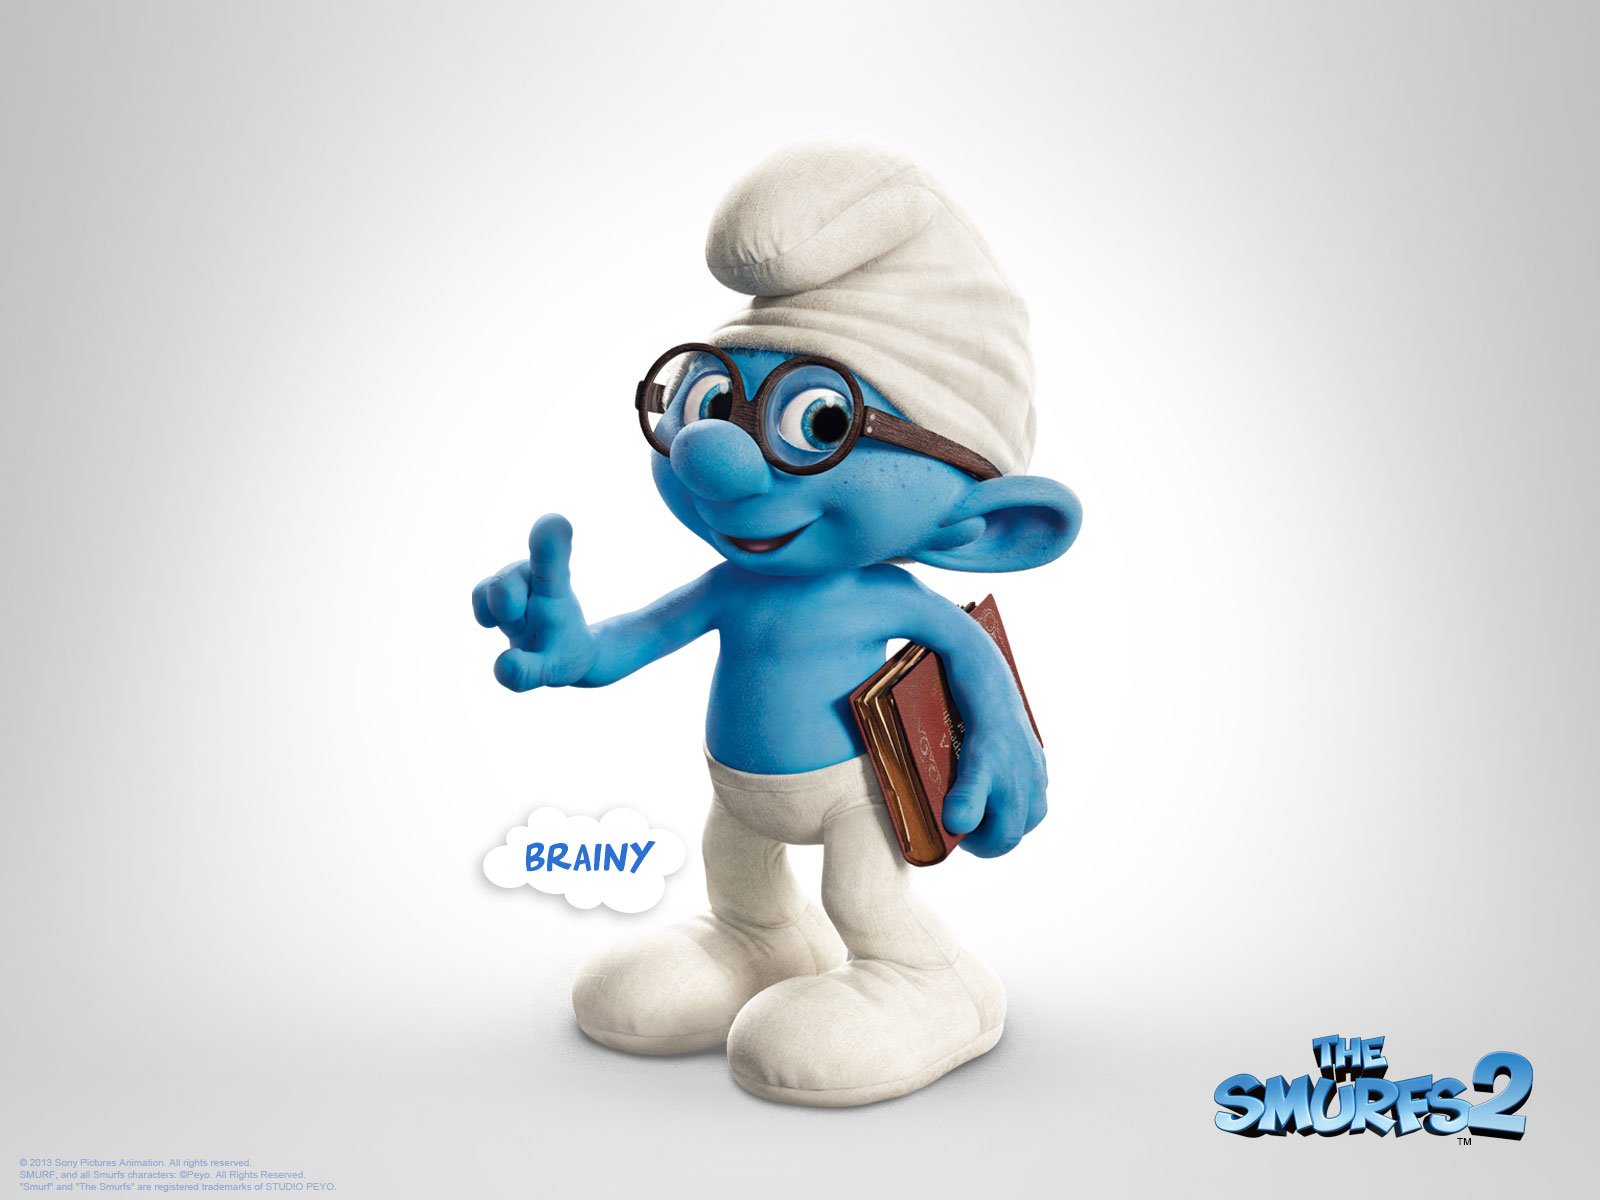 The Smurfs 2 - Buy On Digital Now Buy on Blu-ray Combo